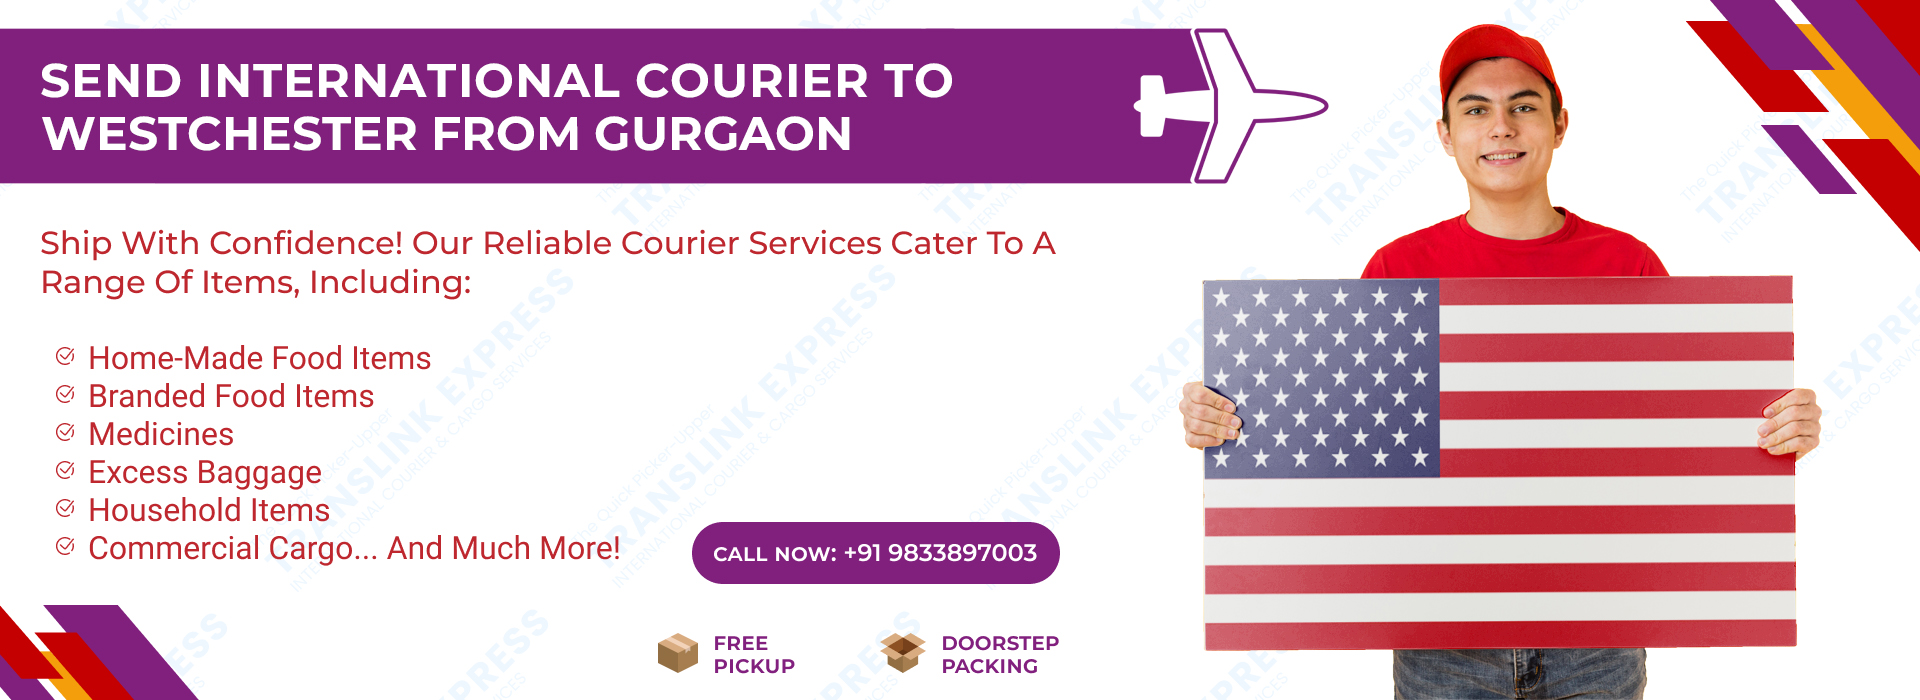 Courier to Westchester From Gurgaon